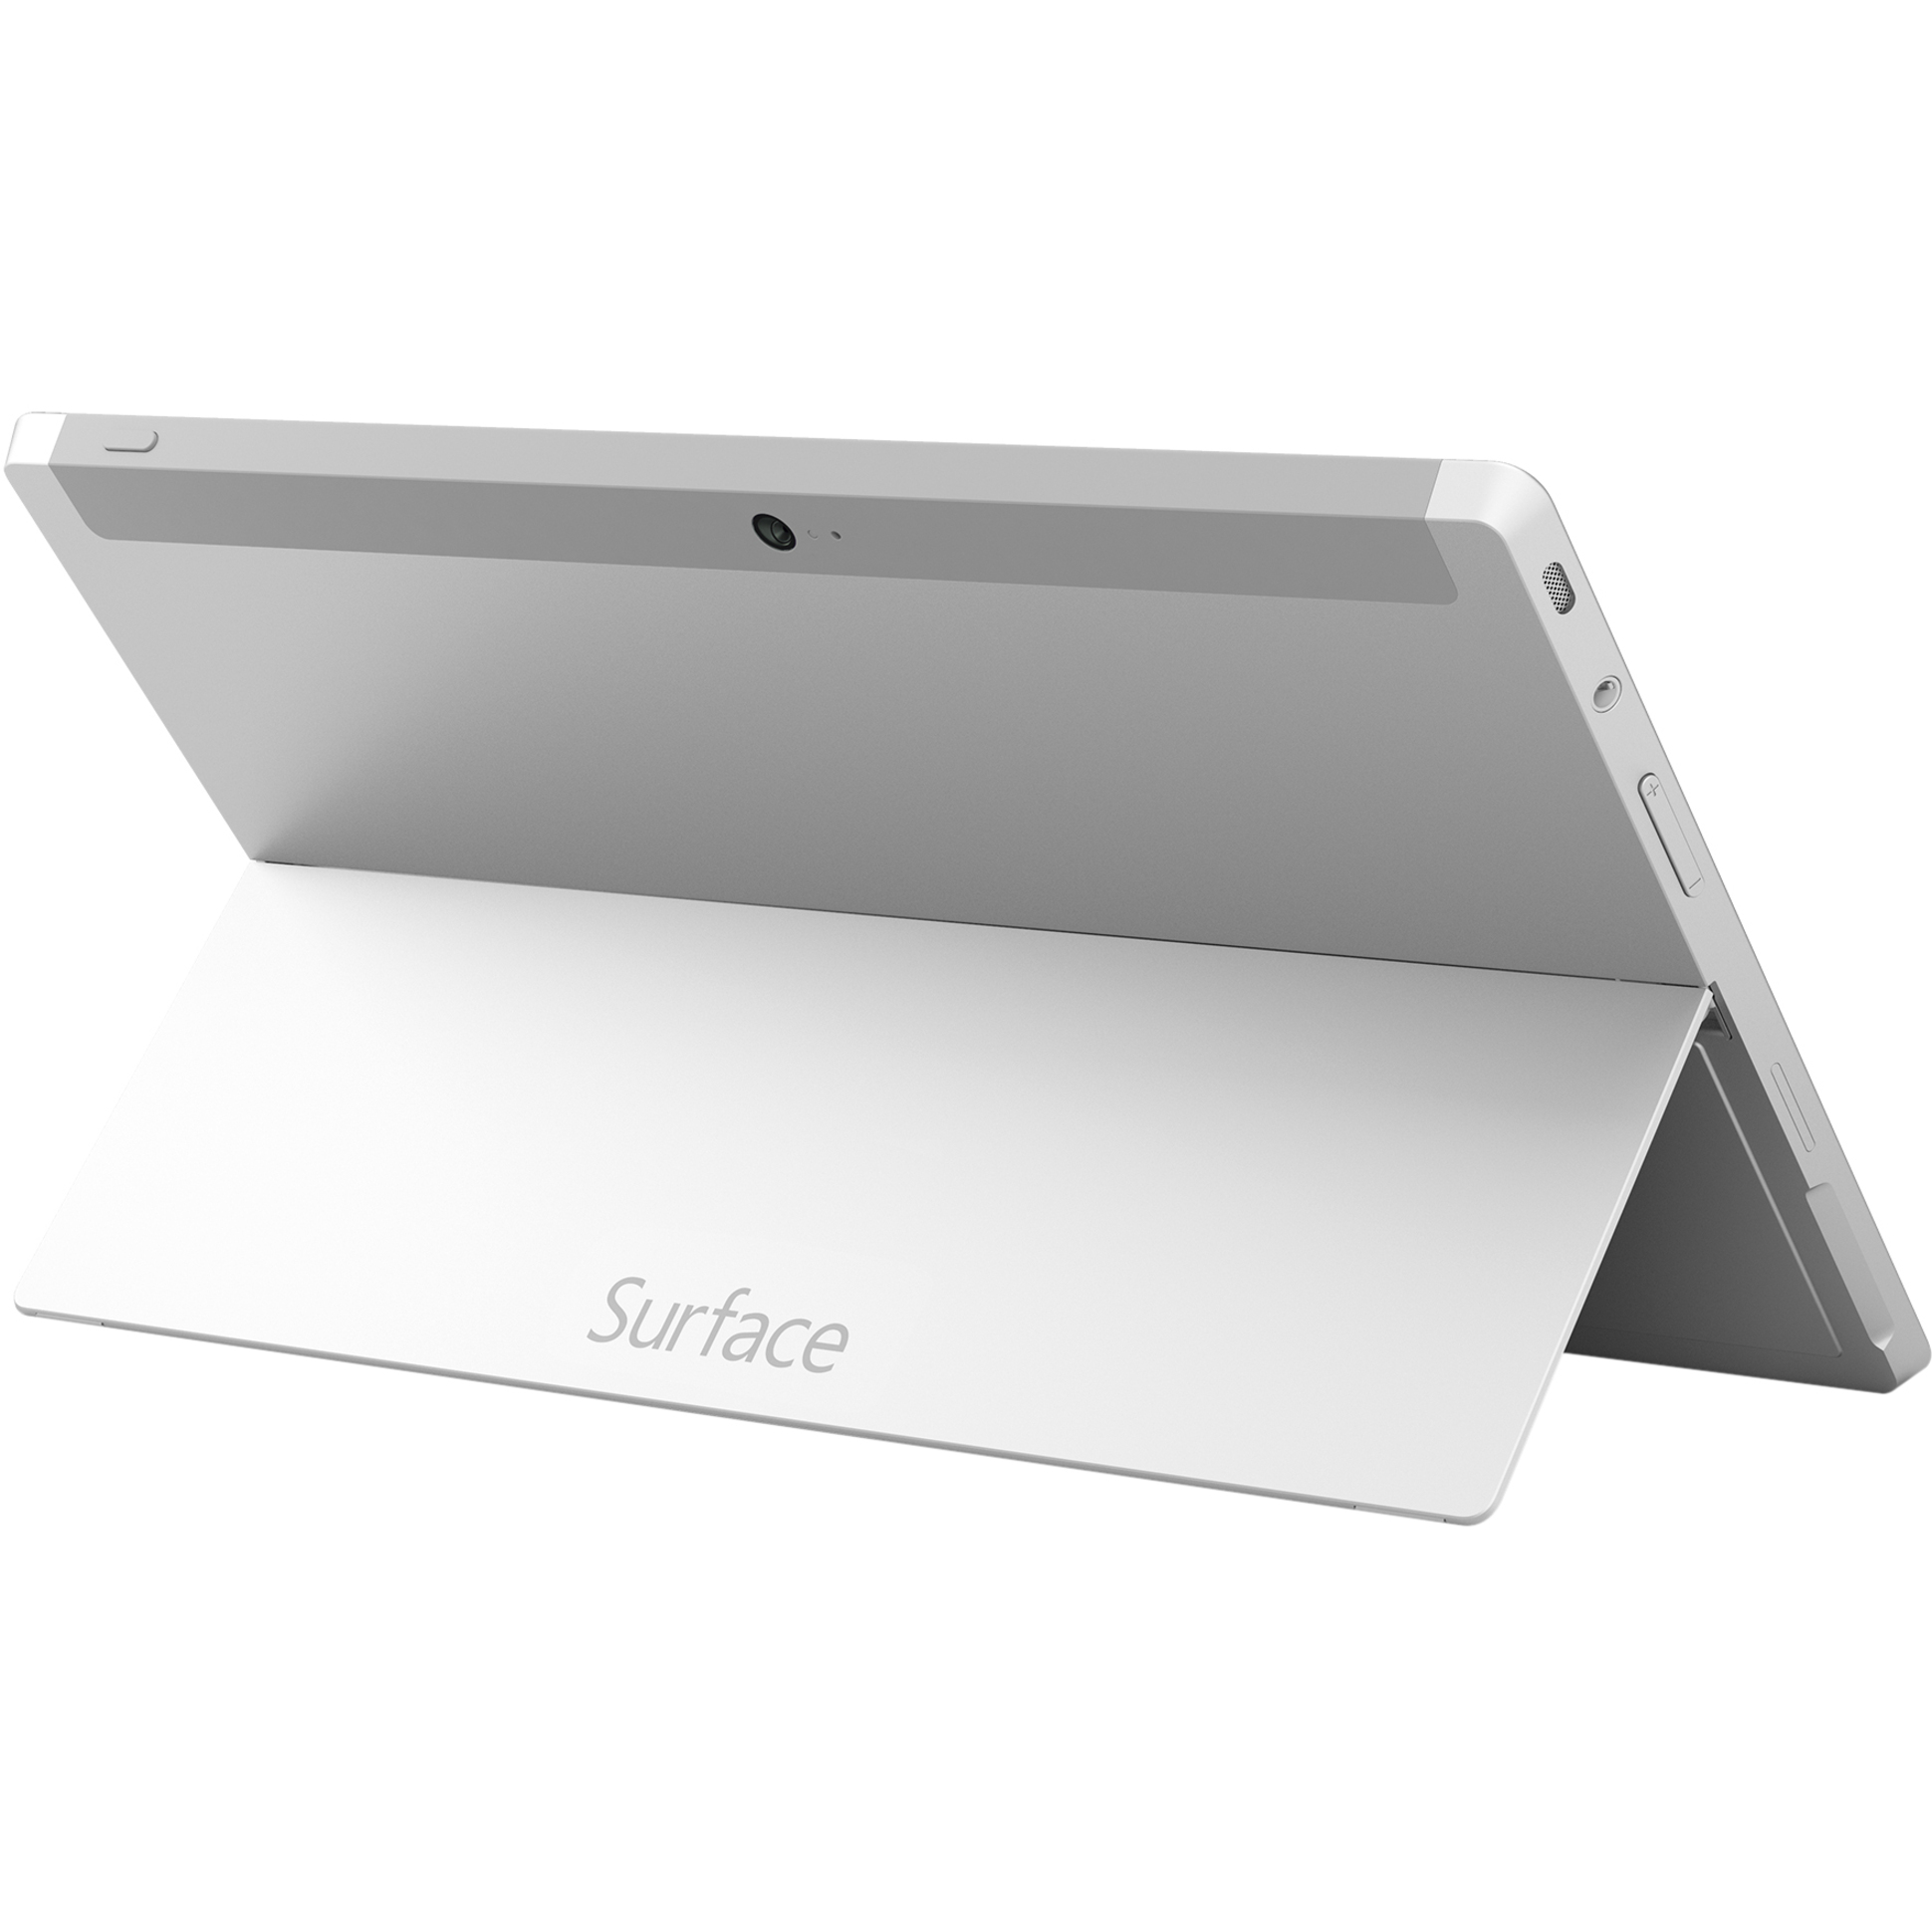 Microsoft Surface 2 Tablet, 10.6" Full HD, Cortex A15 Quad-core (4 Core) 1.70 GHz, 2 GB RAM, 64 GB Storage, Windows 8.1 RT, Magnesium Silver - image 2 of 5